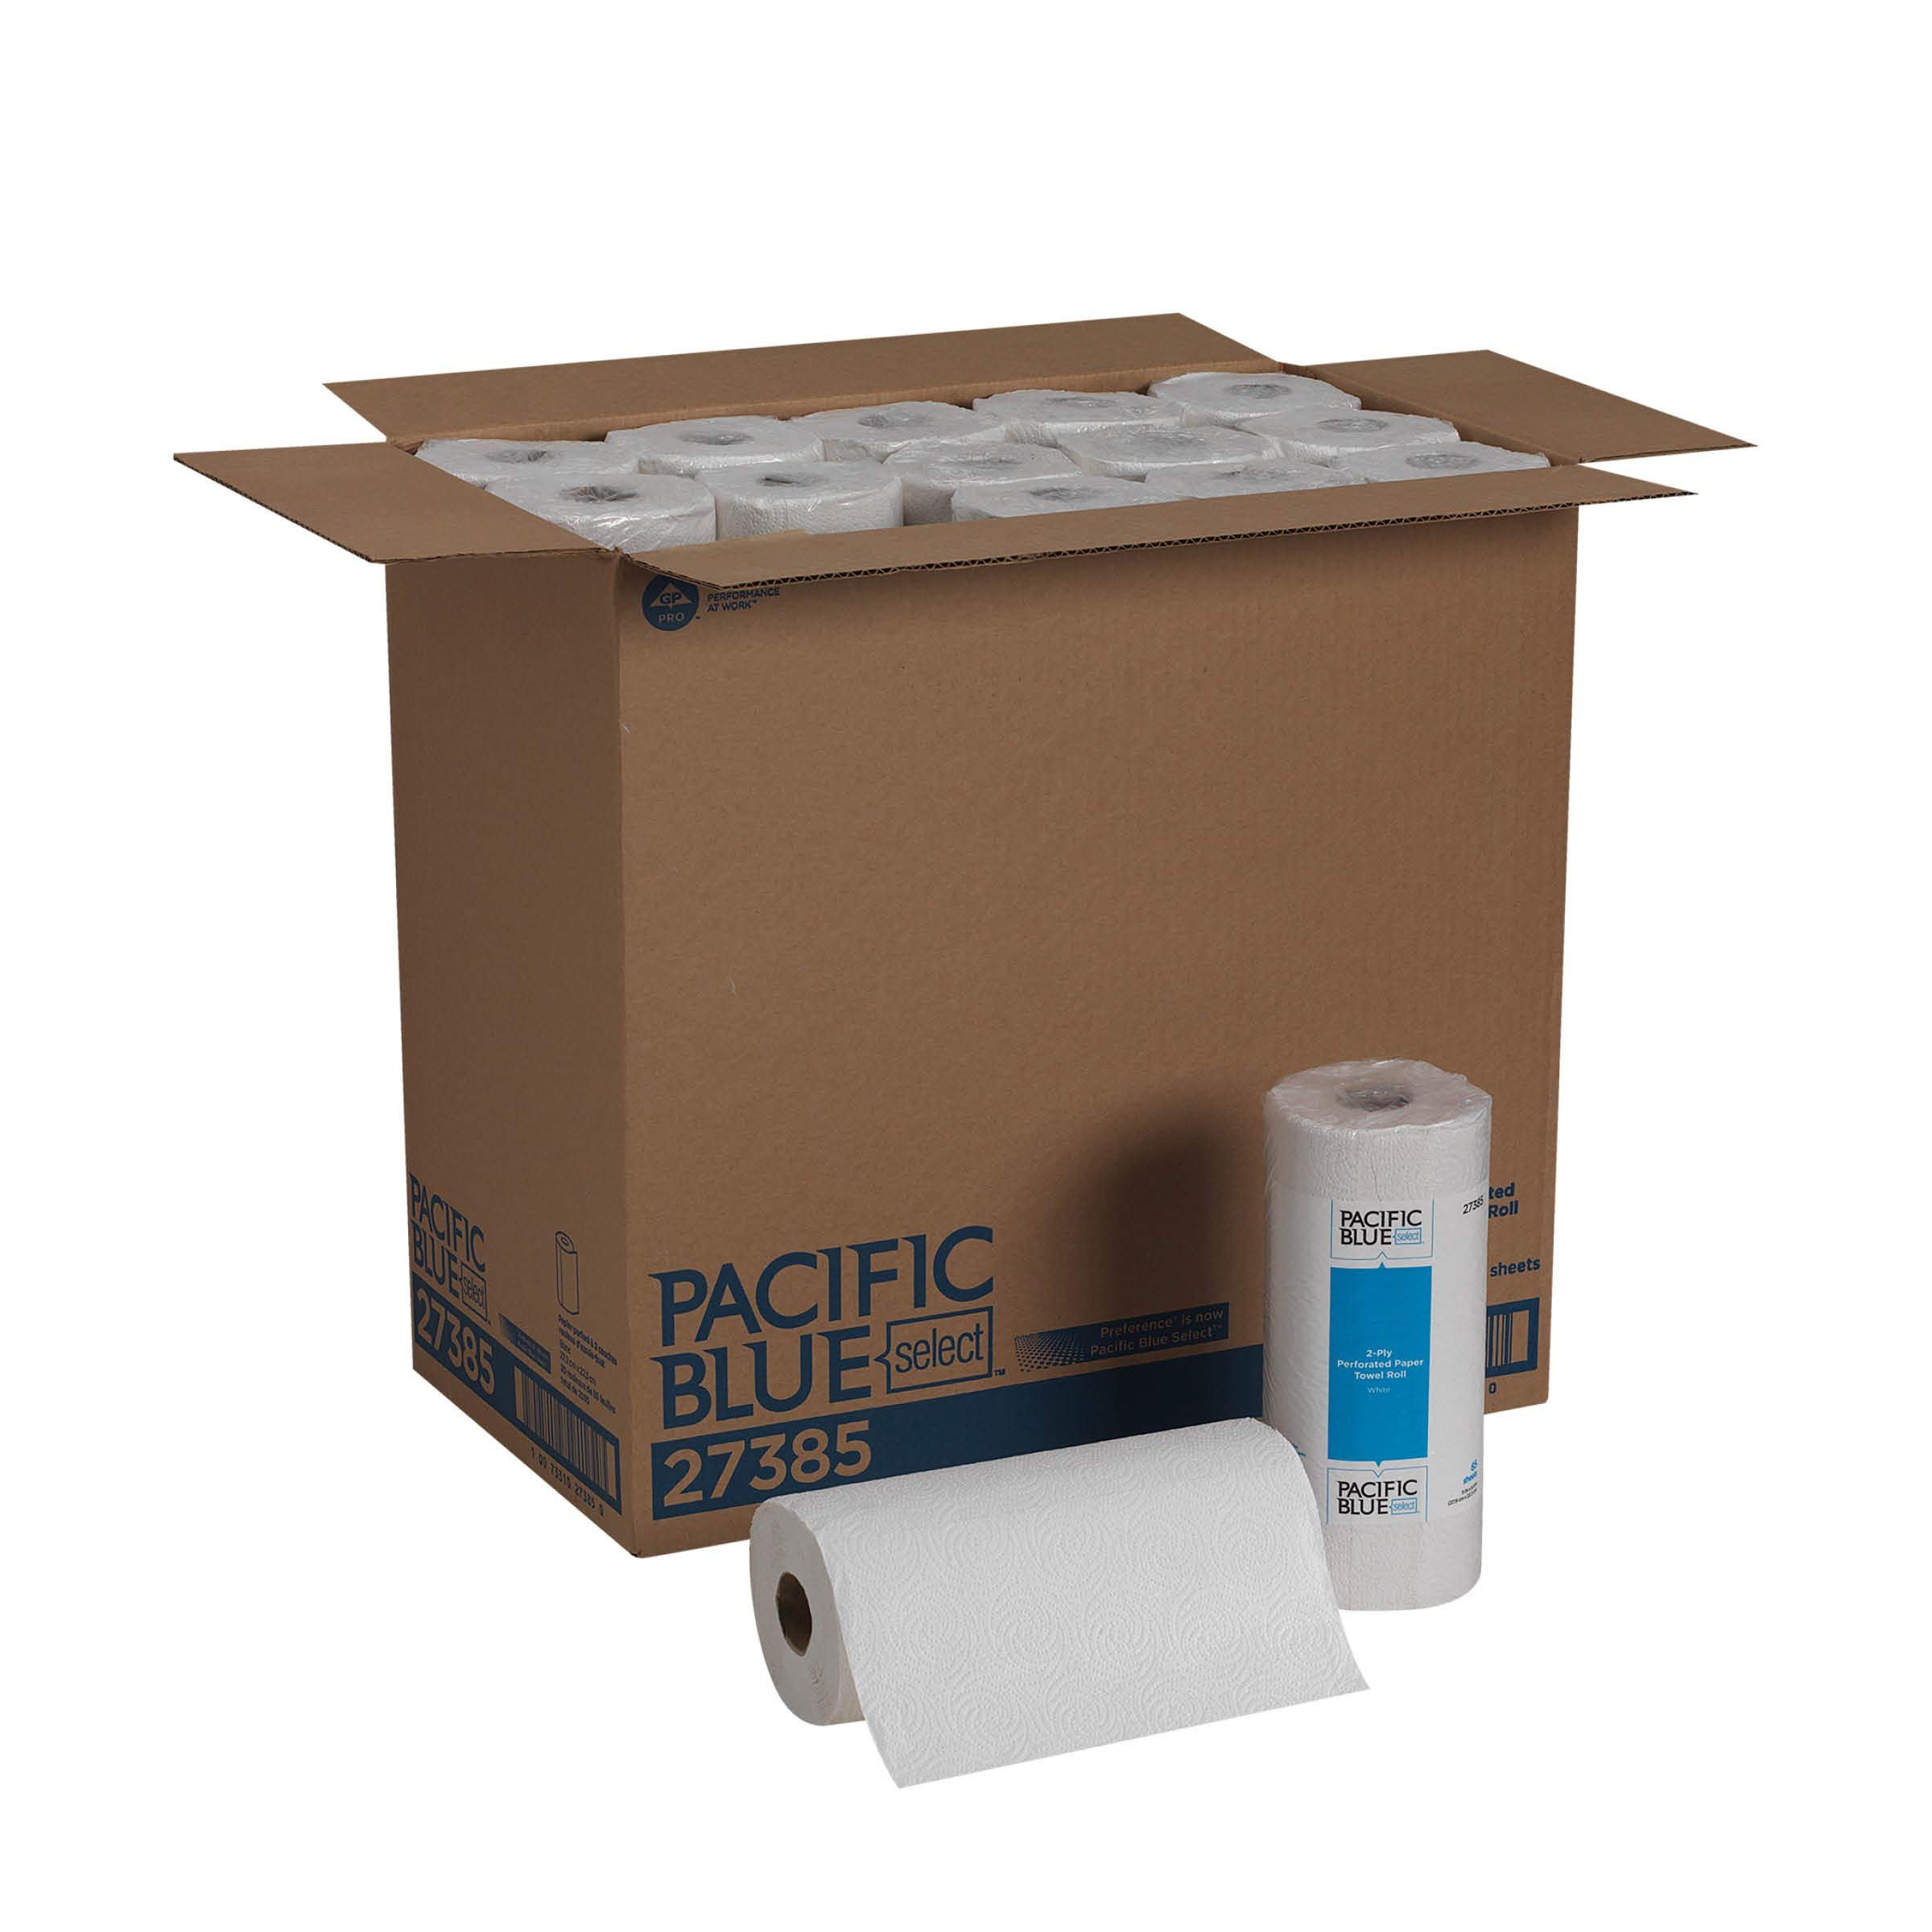 Book Cover Pacific Blue Select 2-Ply Perforated Paper Towel Rolls by GP PRO (Georgia-Pacific), 27385, 85 Sheets Per Roll, 30 Rolls Per Case